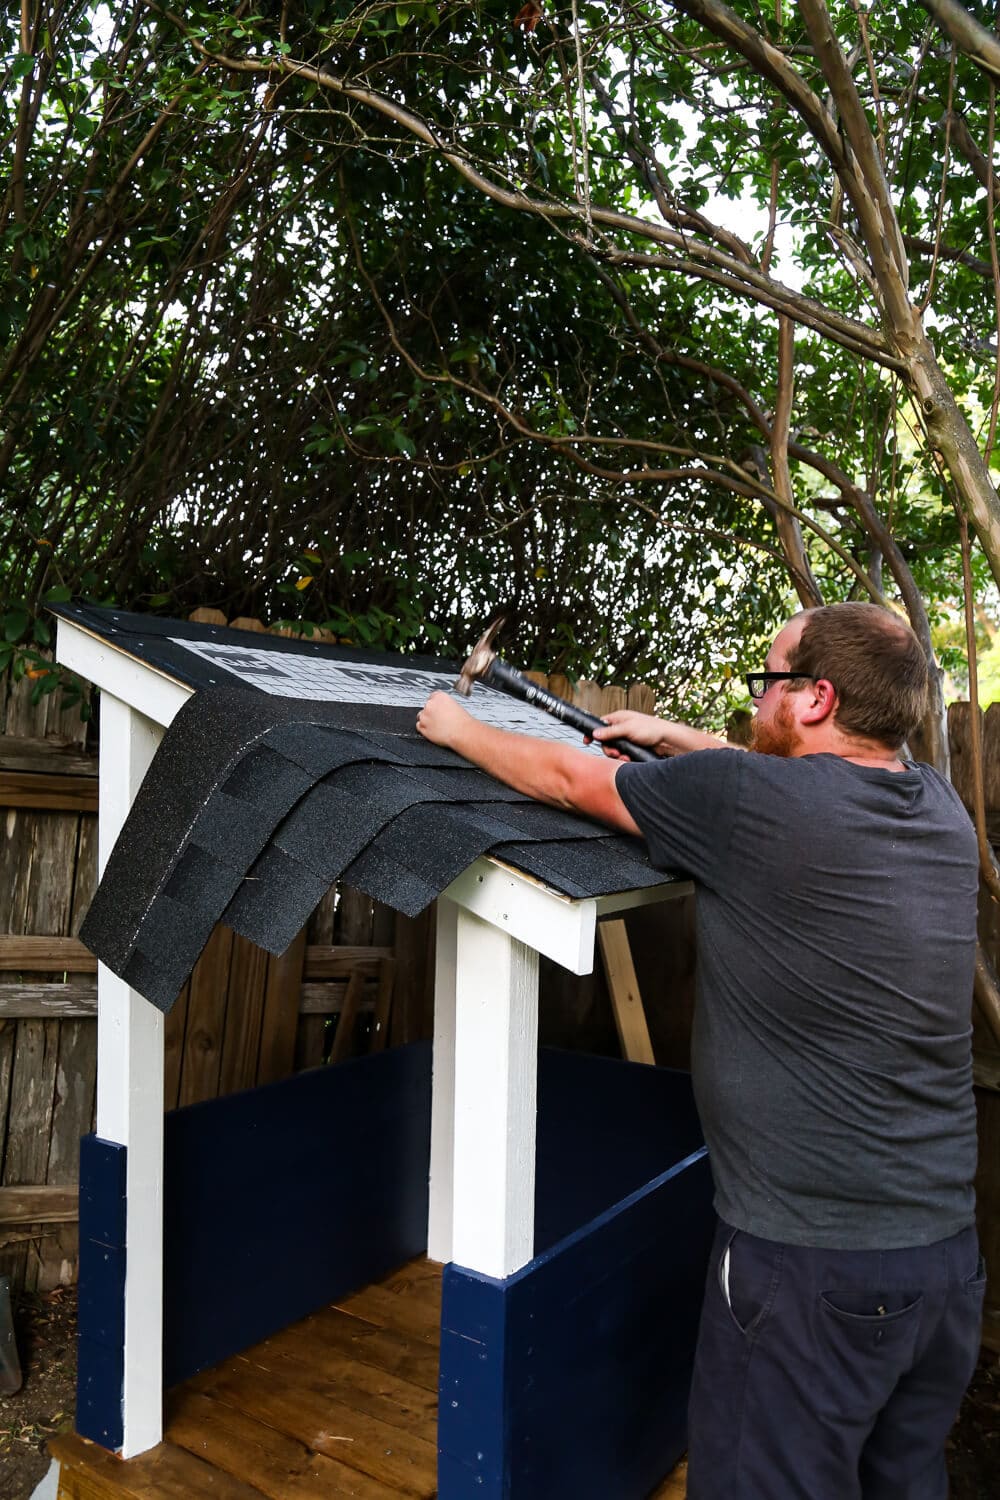 Installing playhouse roof shingles